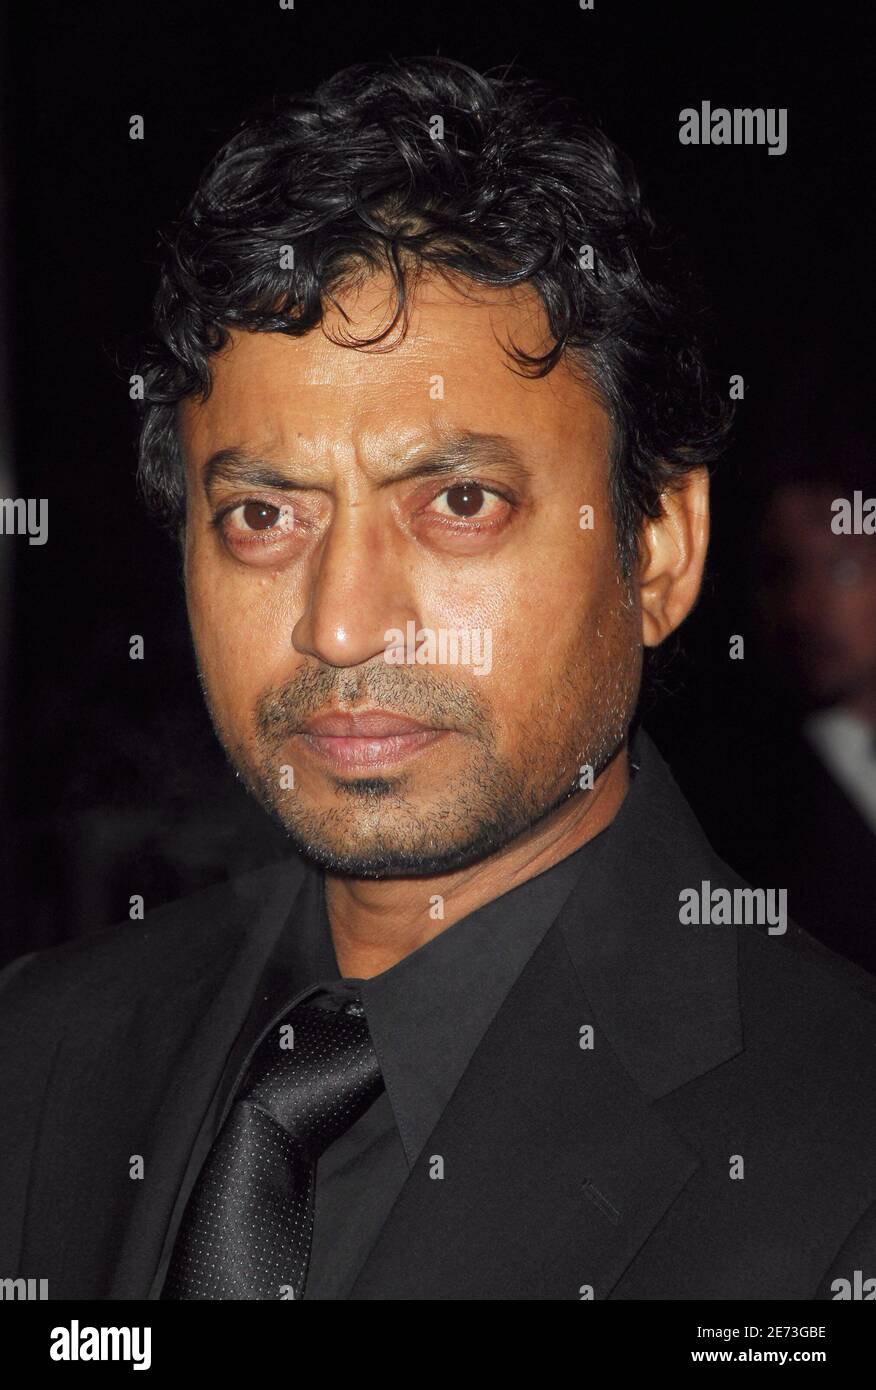 Actor Irrfan Khan attends the Fox Searchlight premiere of 'The Namesake' held at Chelsea West Theaters in New York City, NY, USA on Tuesday, March 6, 2007. Photo by Gregorio Binuya/ABACAPRESS.COM Stock Photo